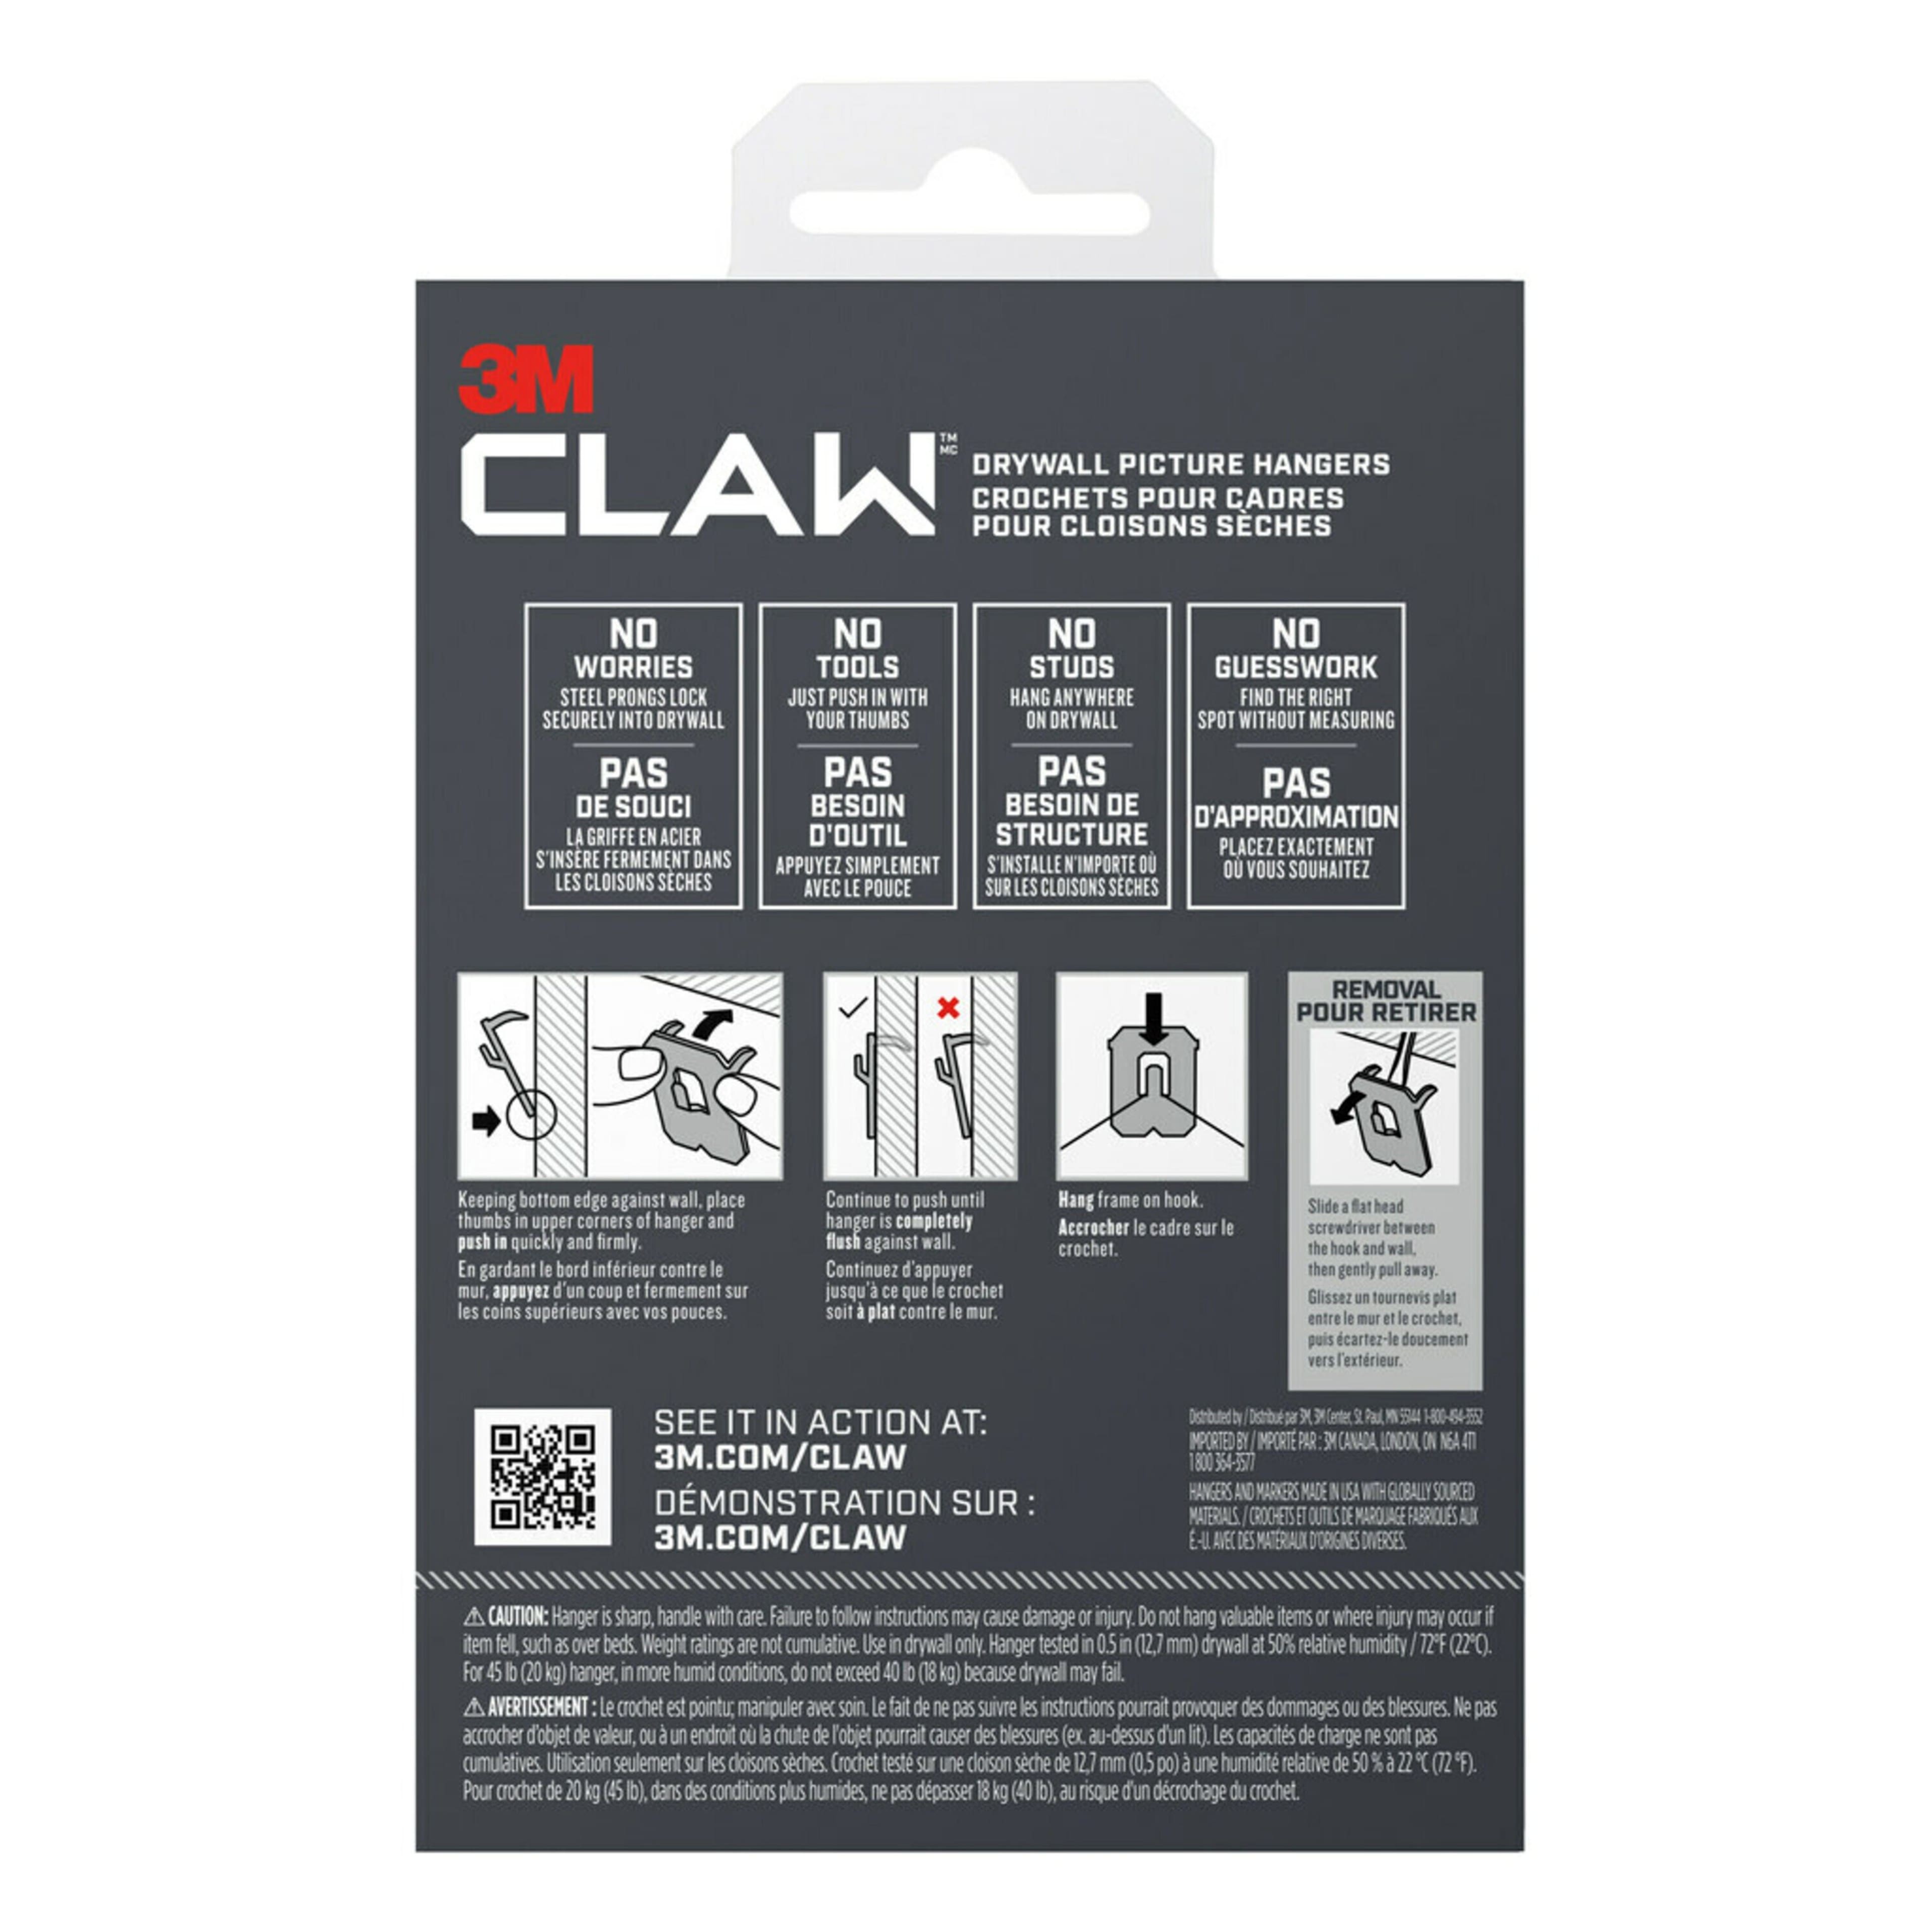 3M 3M CLAW Drywall Picture Hanger with Temporary Spot Marker, Holds 25 lbs,  1 Hanger 1 Ma